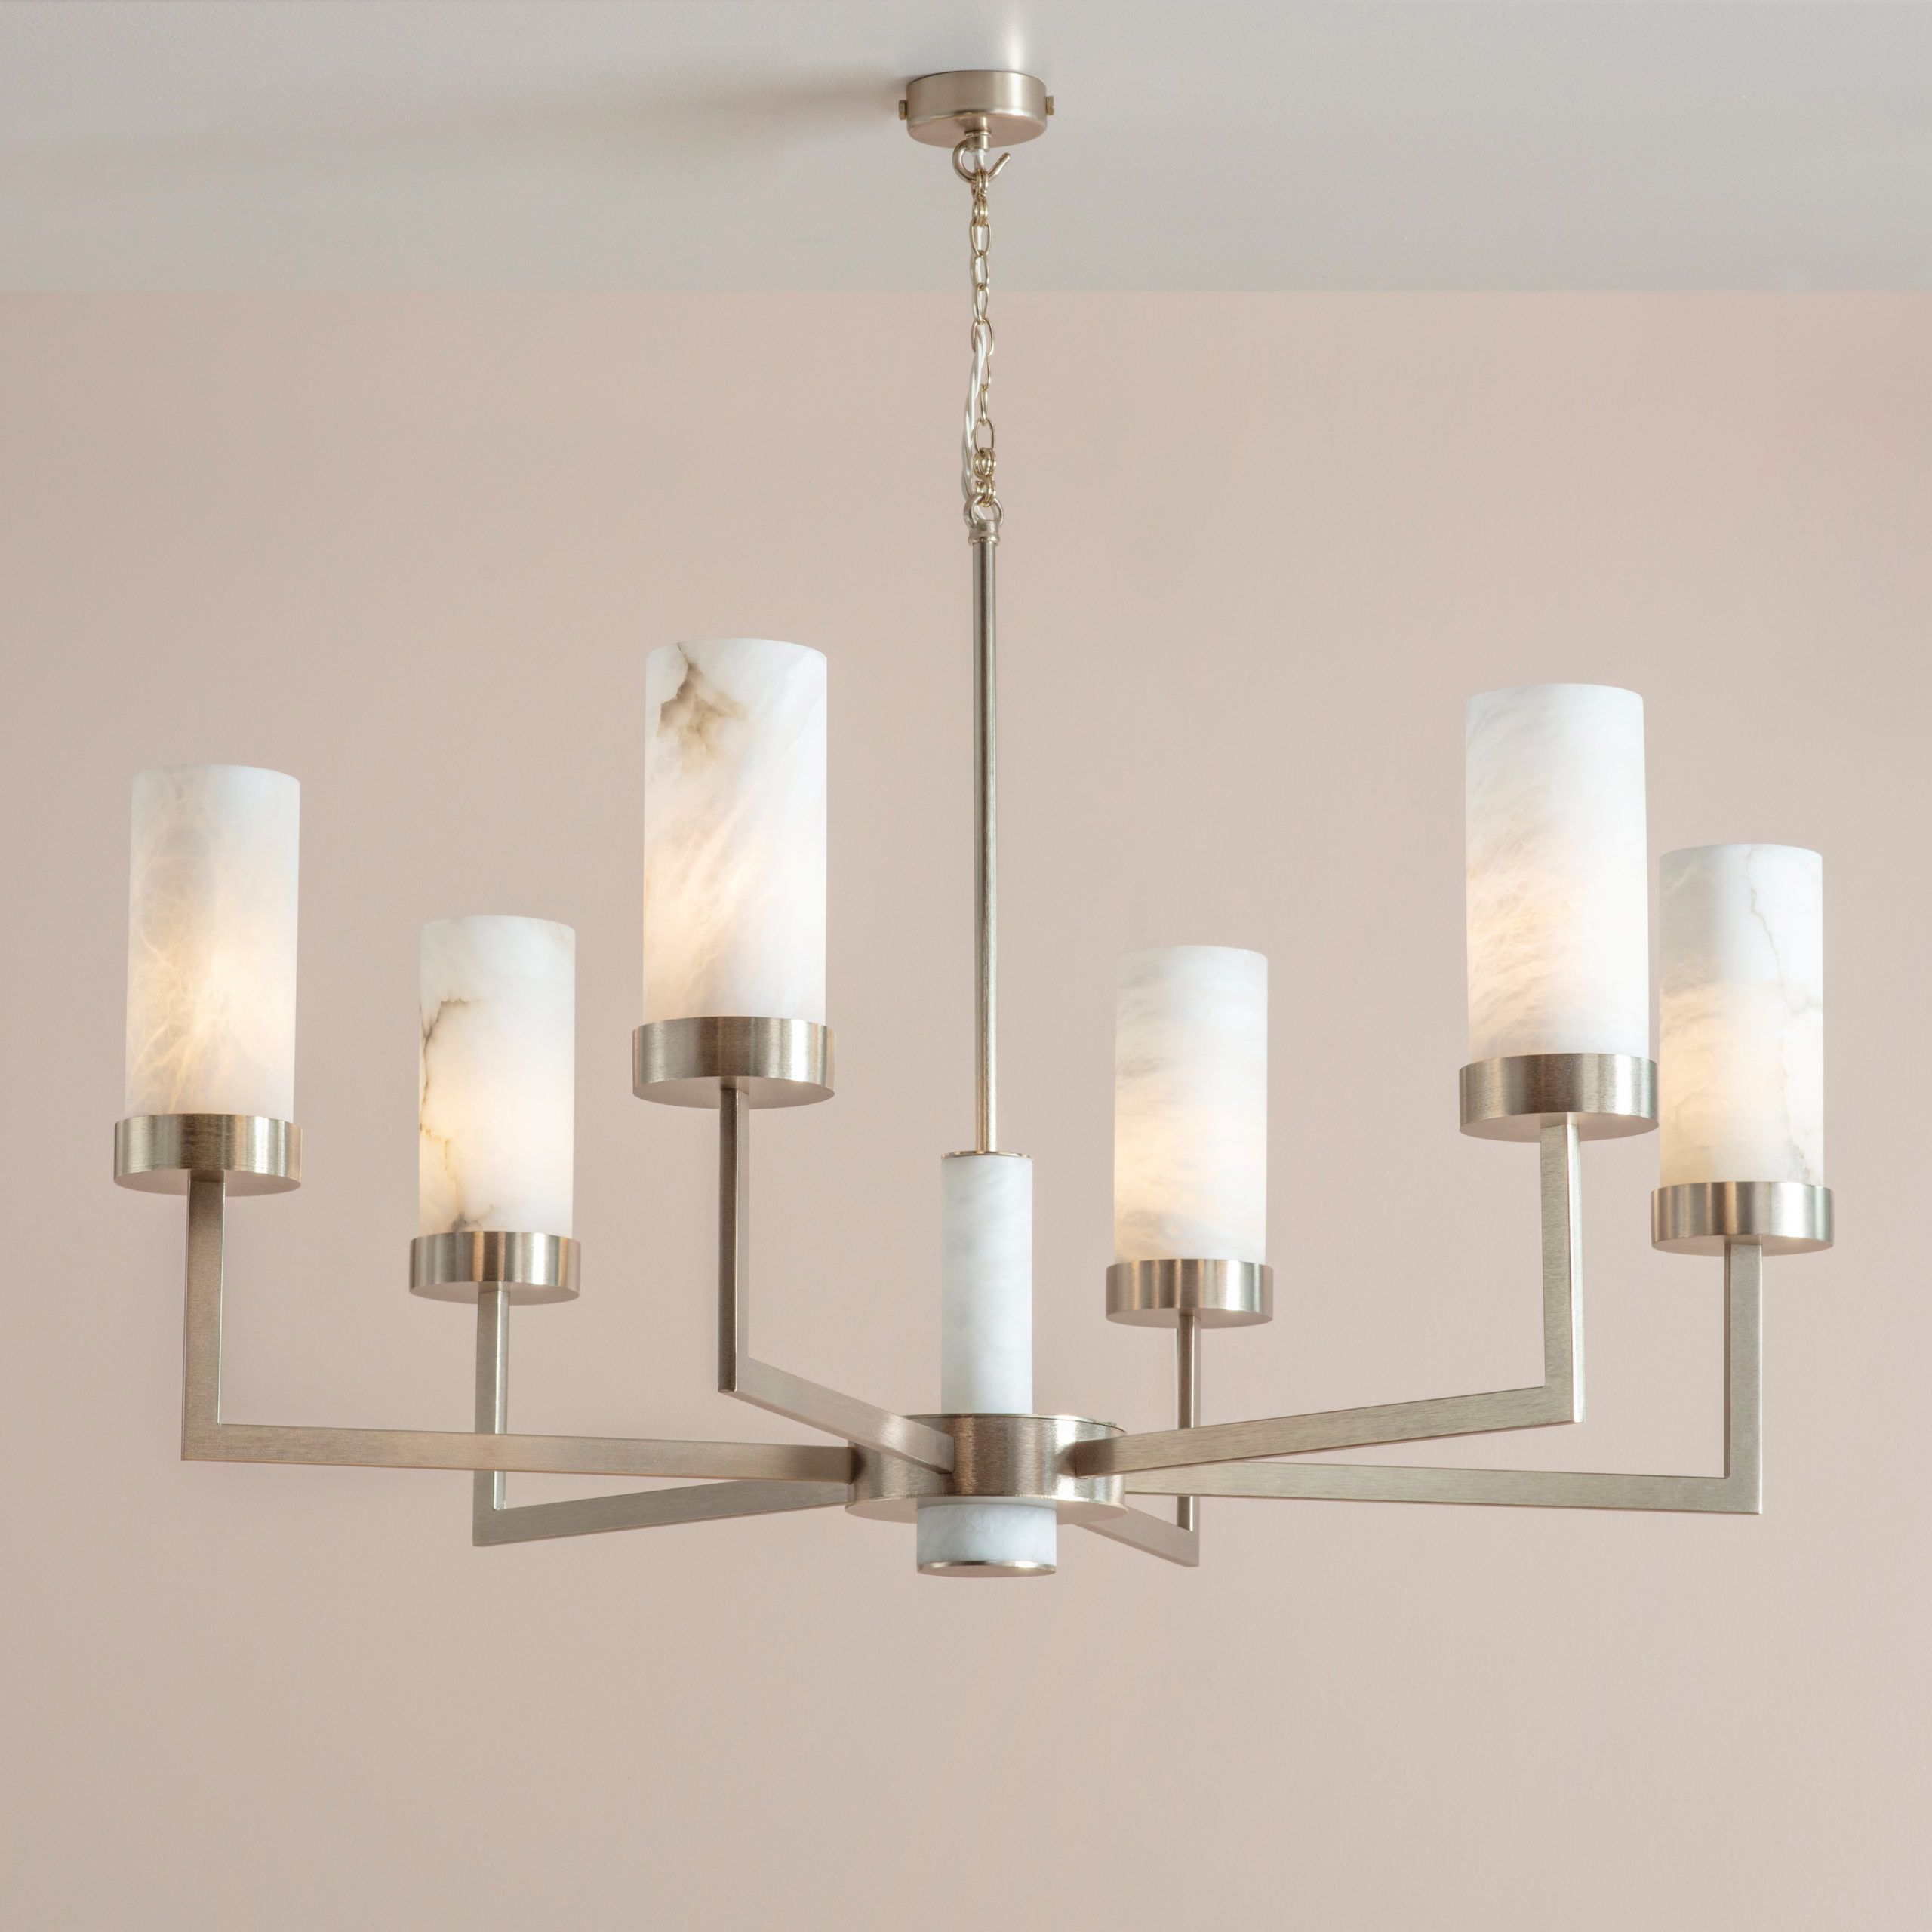 Chandelier COMPASS by Tigermoth